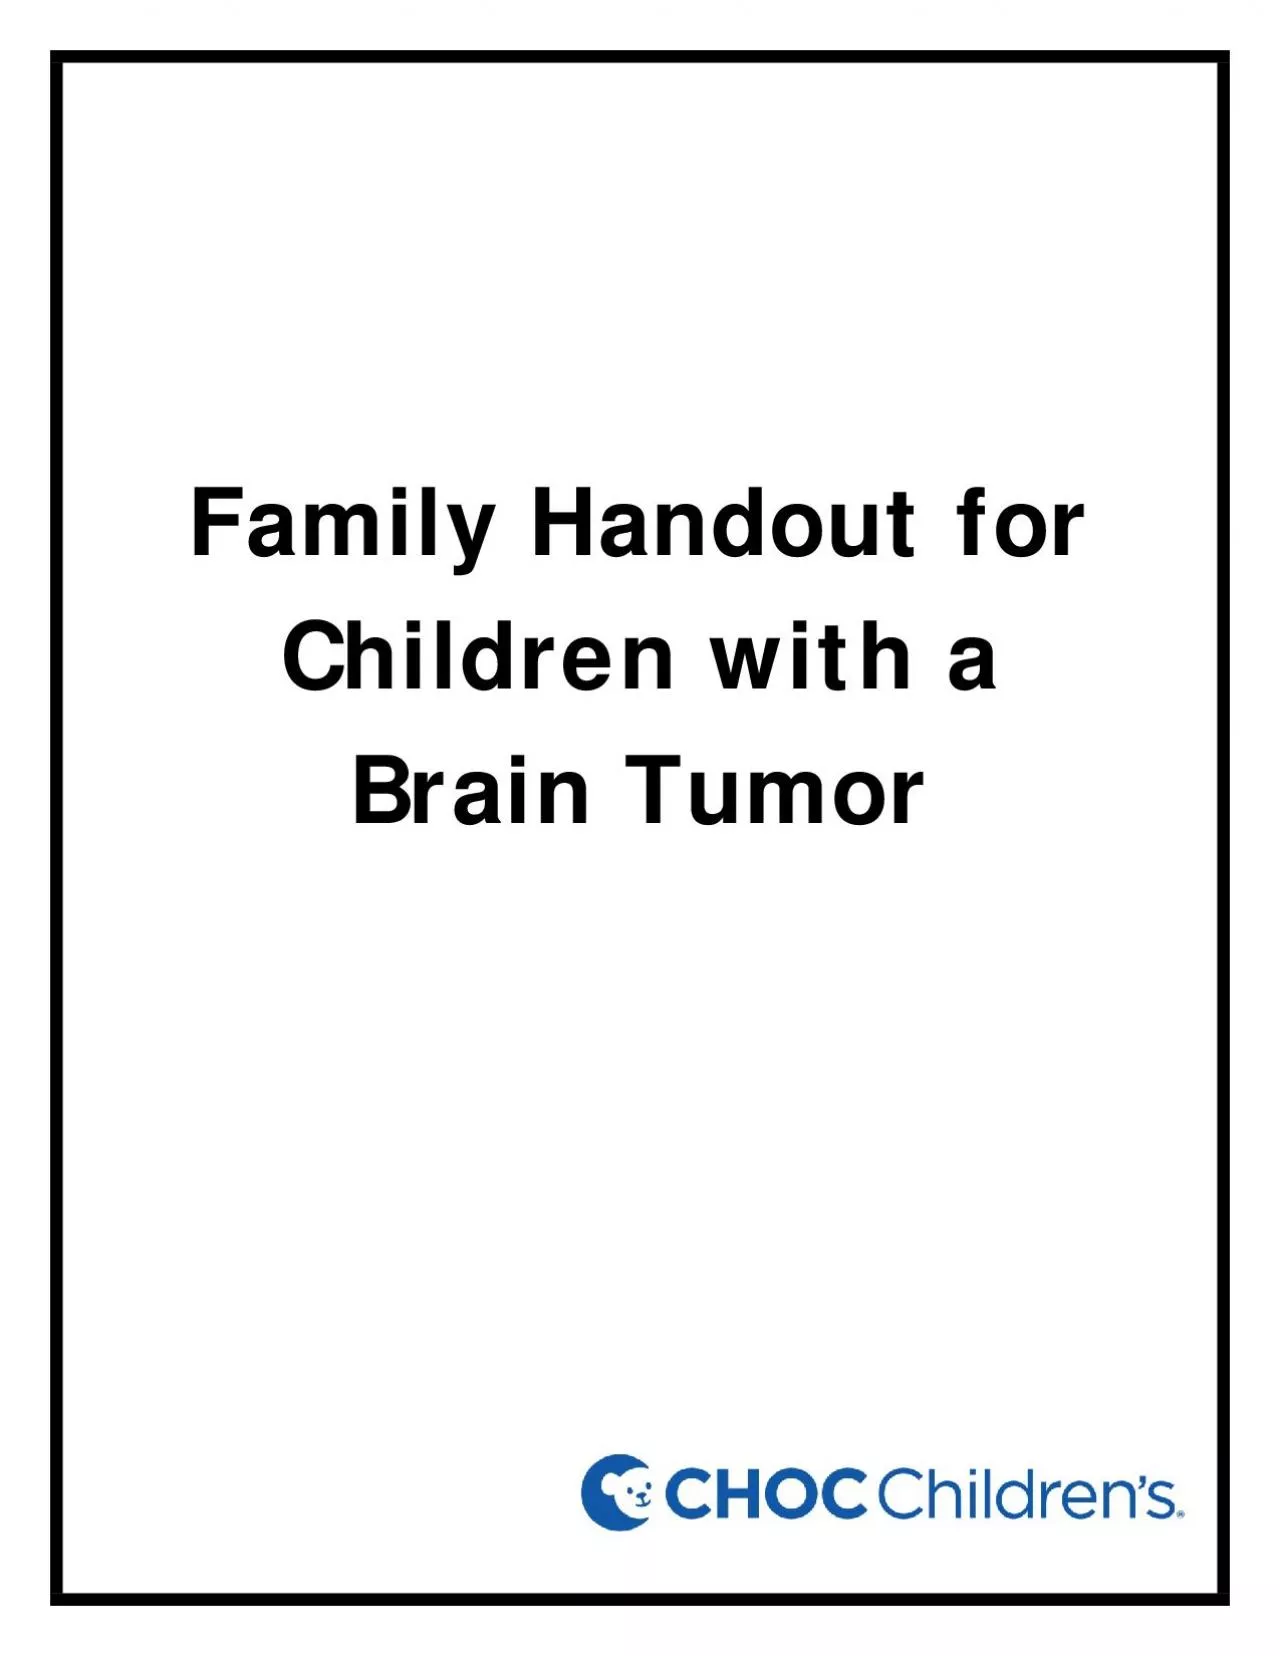 Family Handout for Children with a Brain Tumor